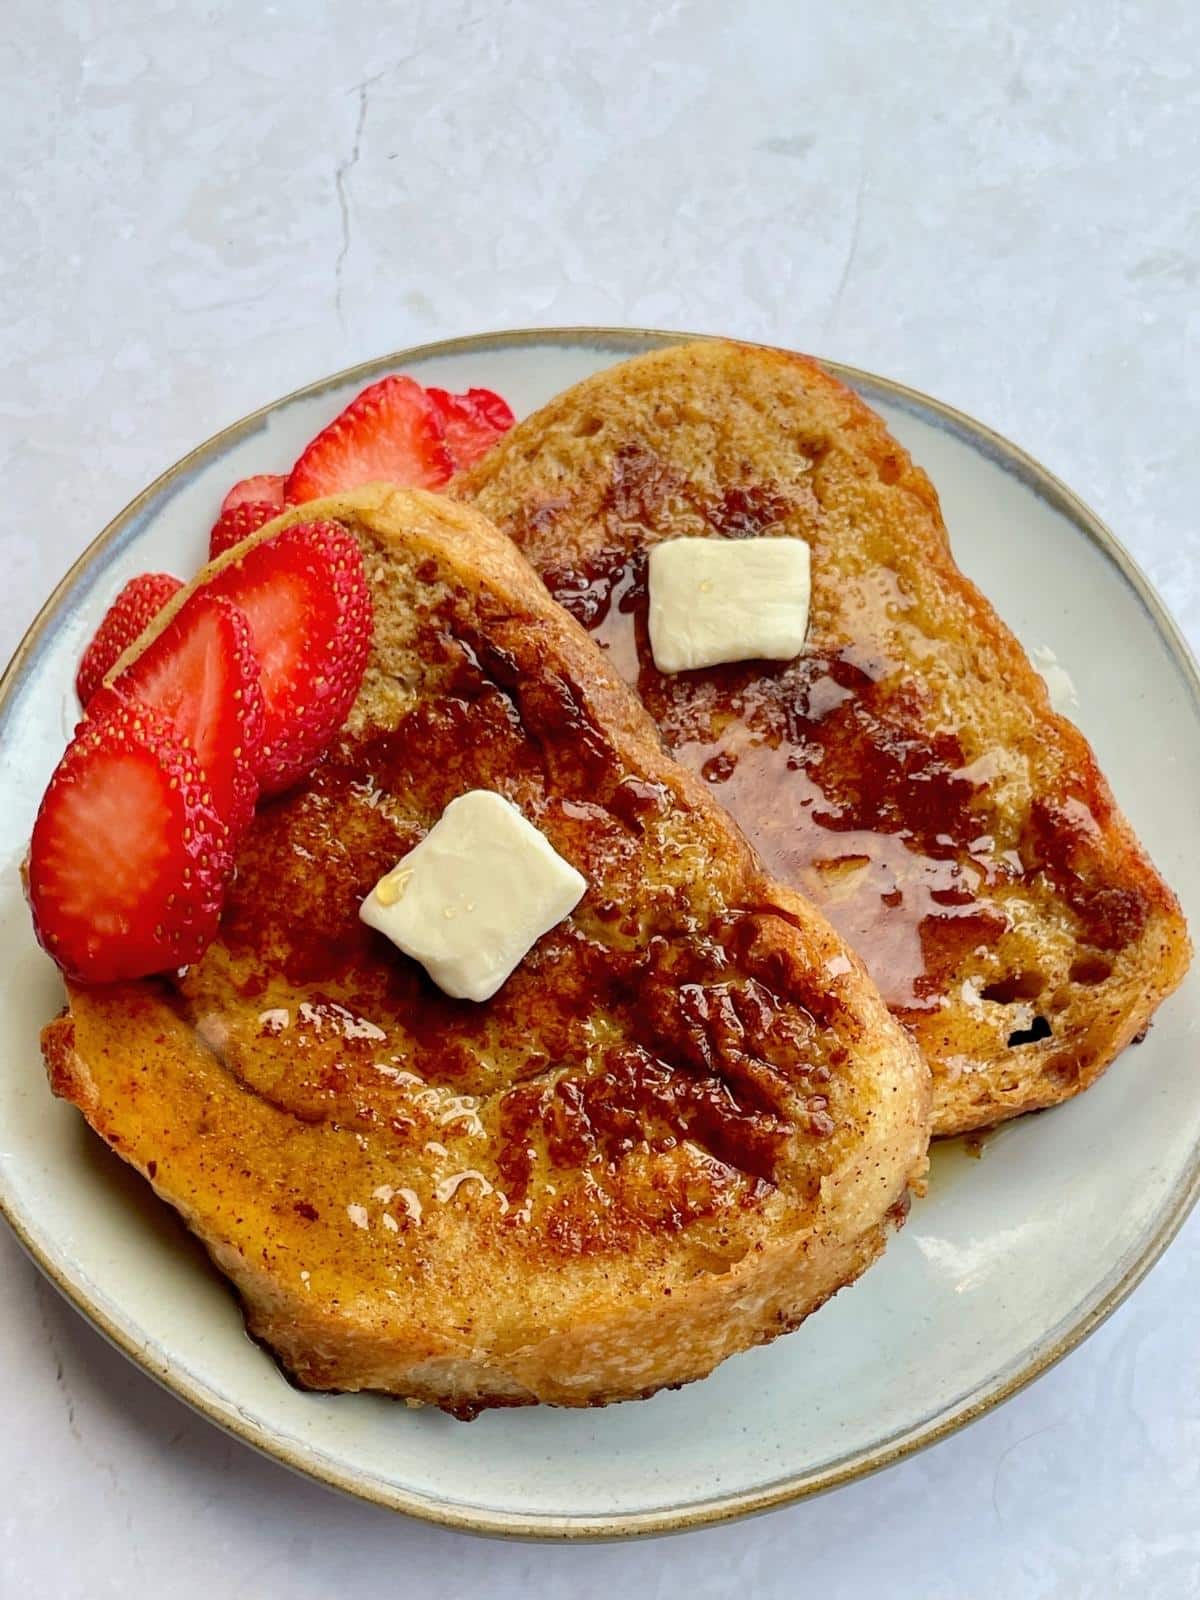 Vegan french toast with butter and fruit.